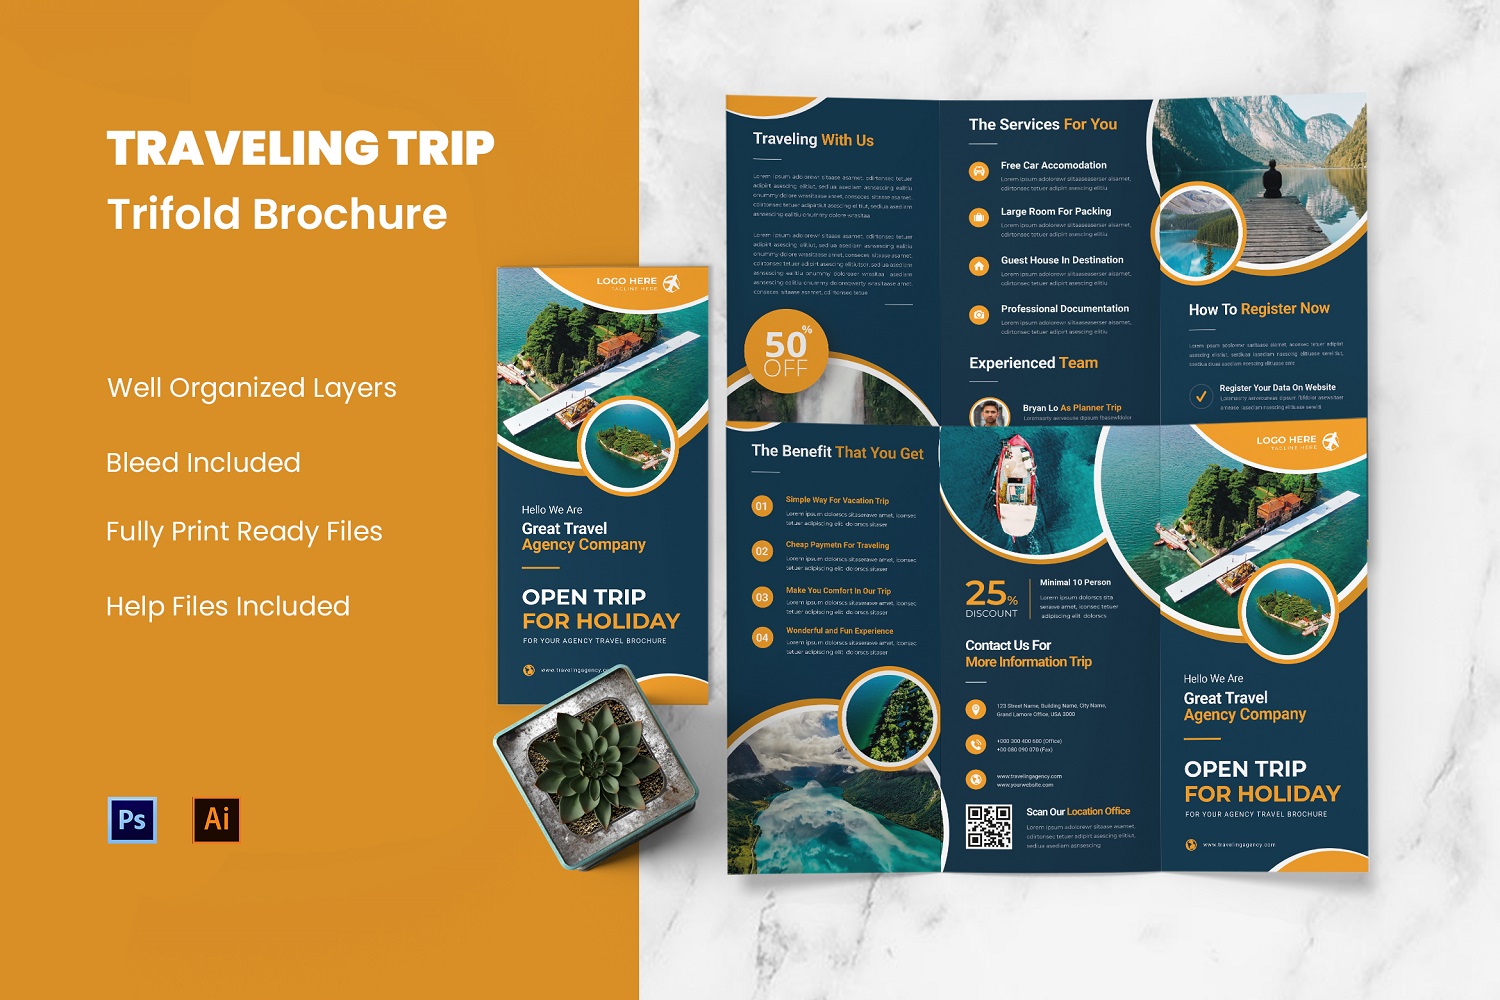 Traveling Trip Trifold Brochure